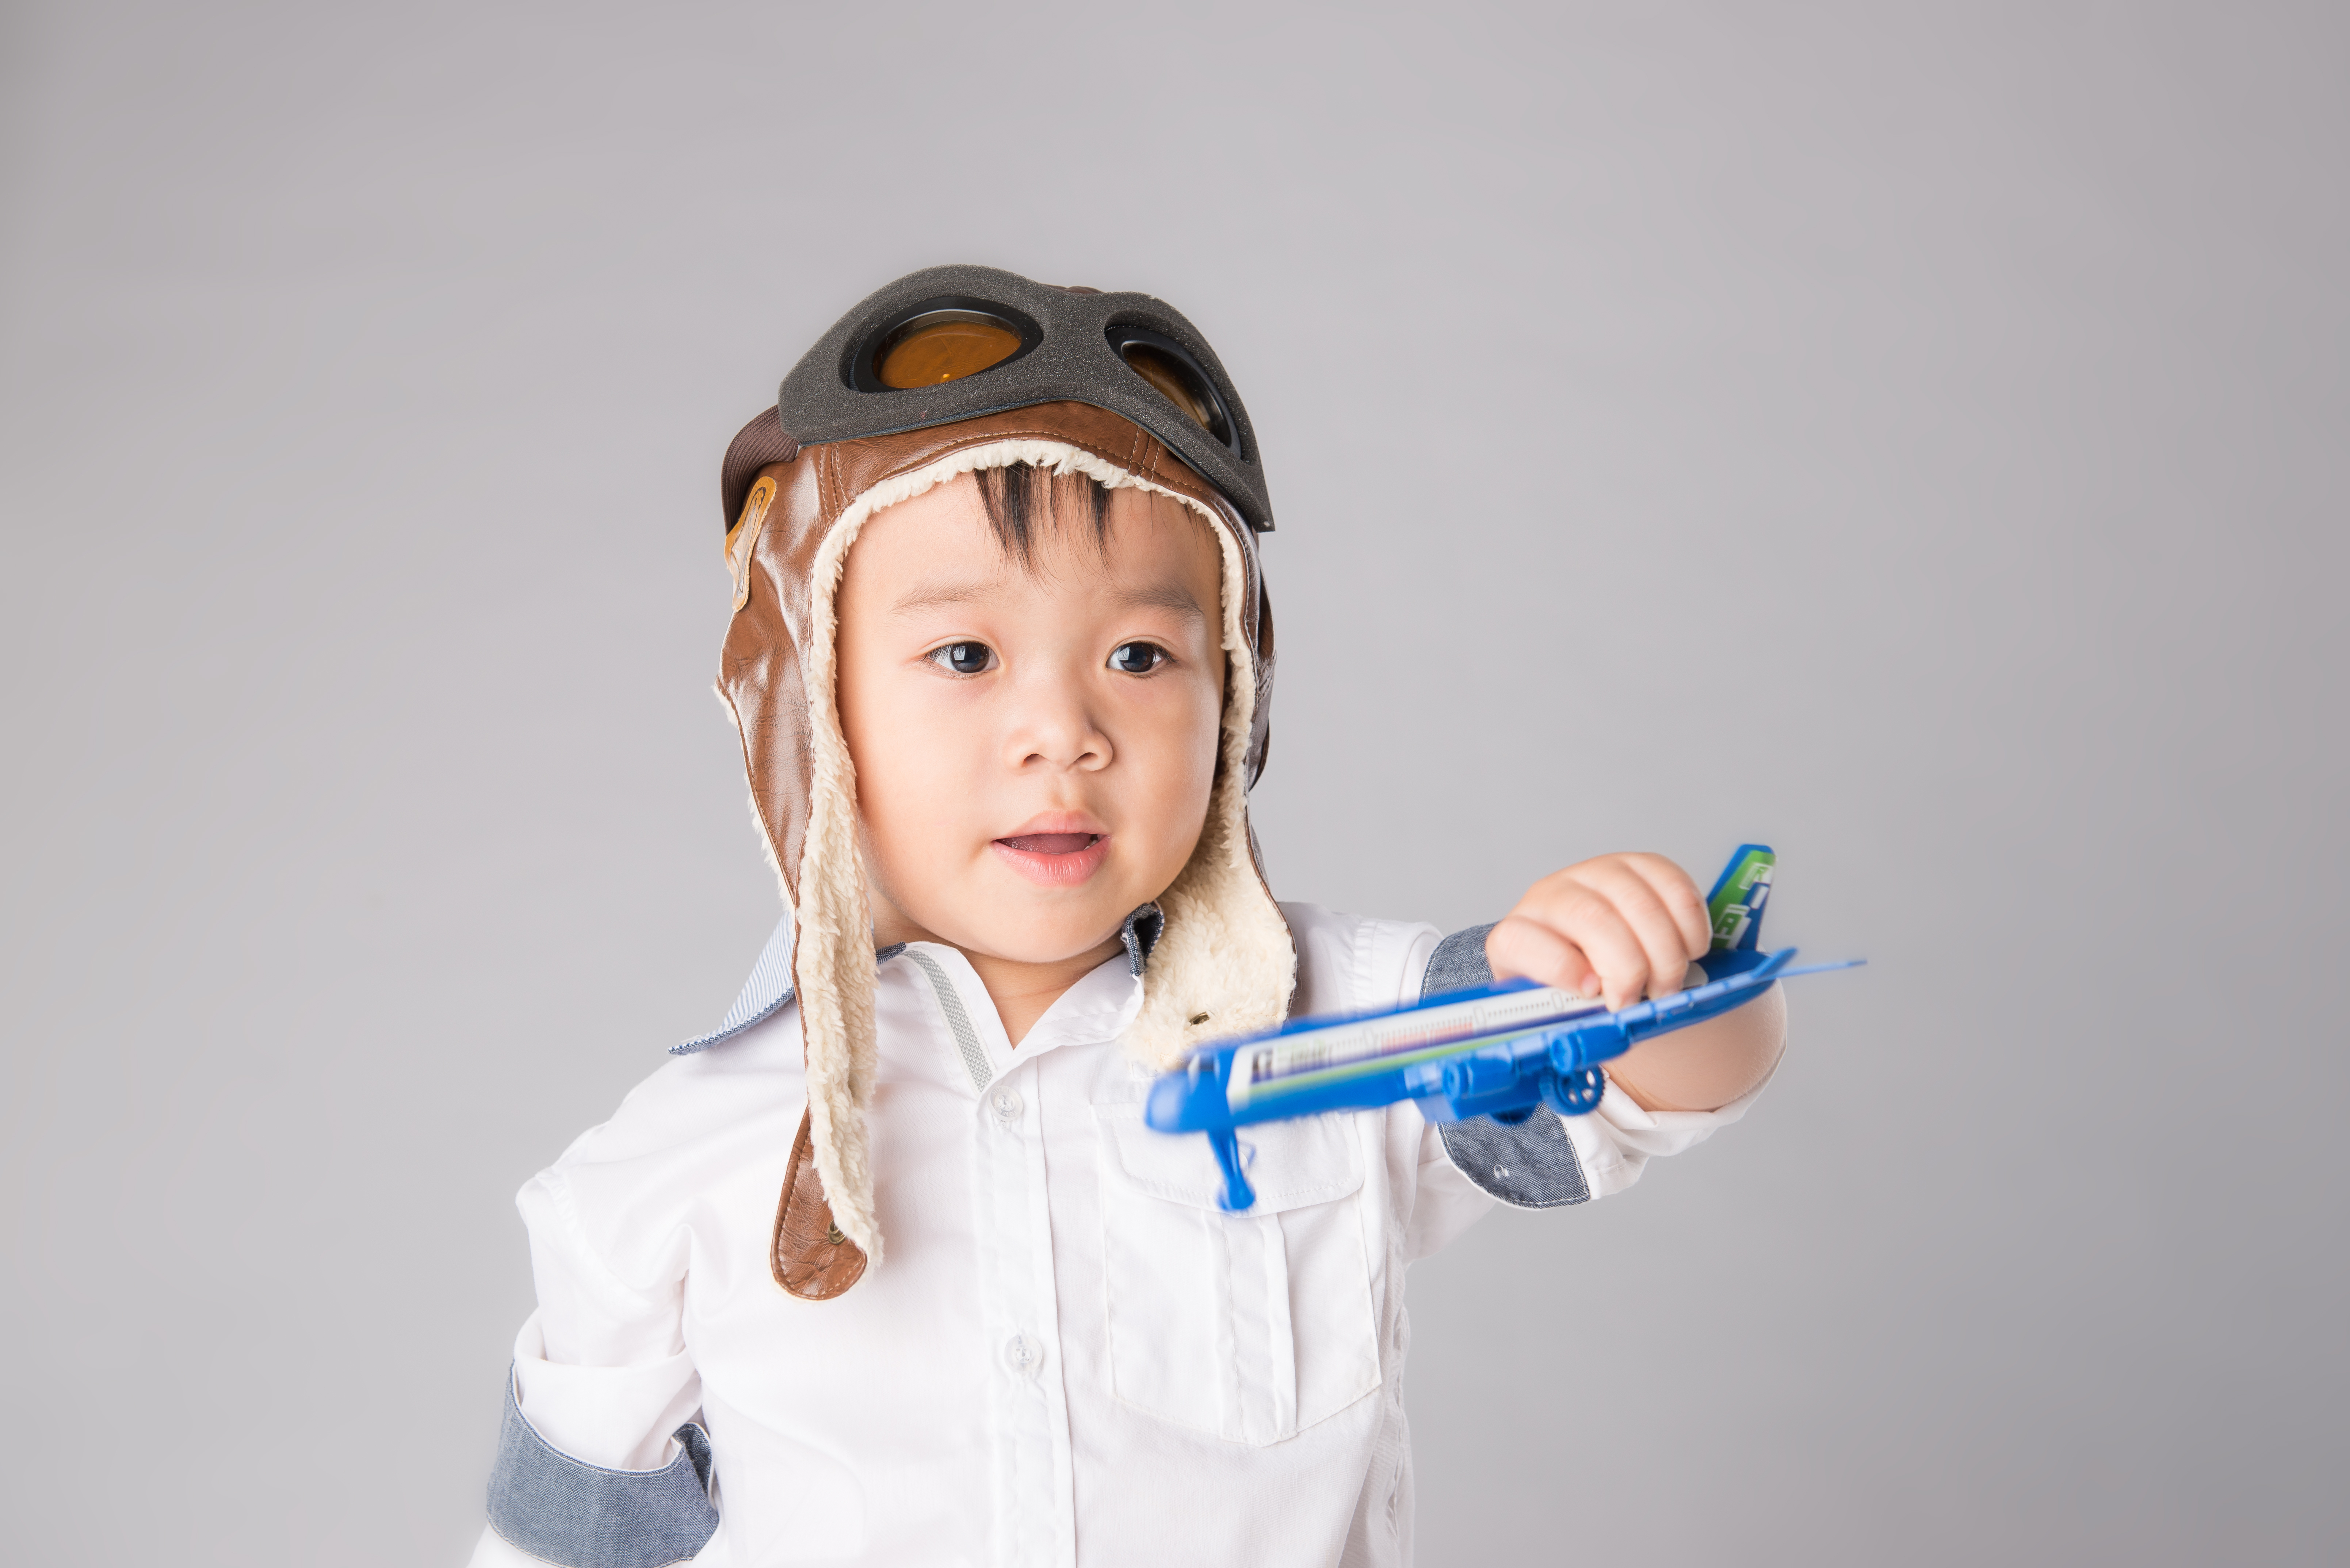 Asian Boy 3 years old playing with air plane © Maki Studio / shutterstock_286045745